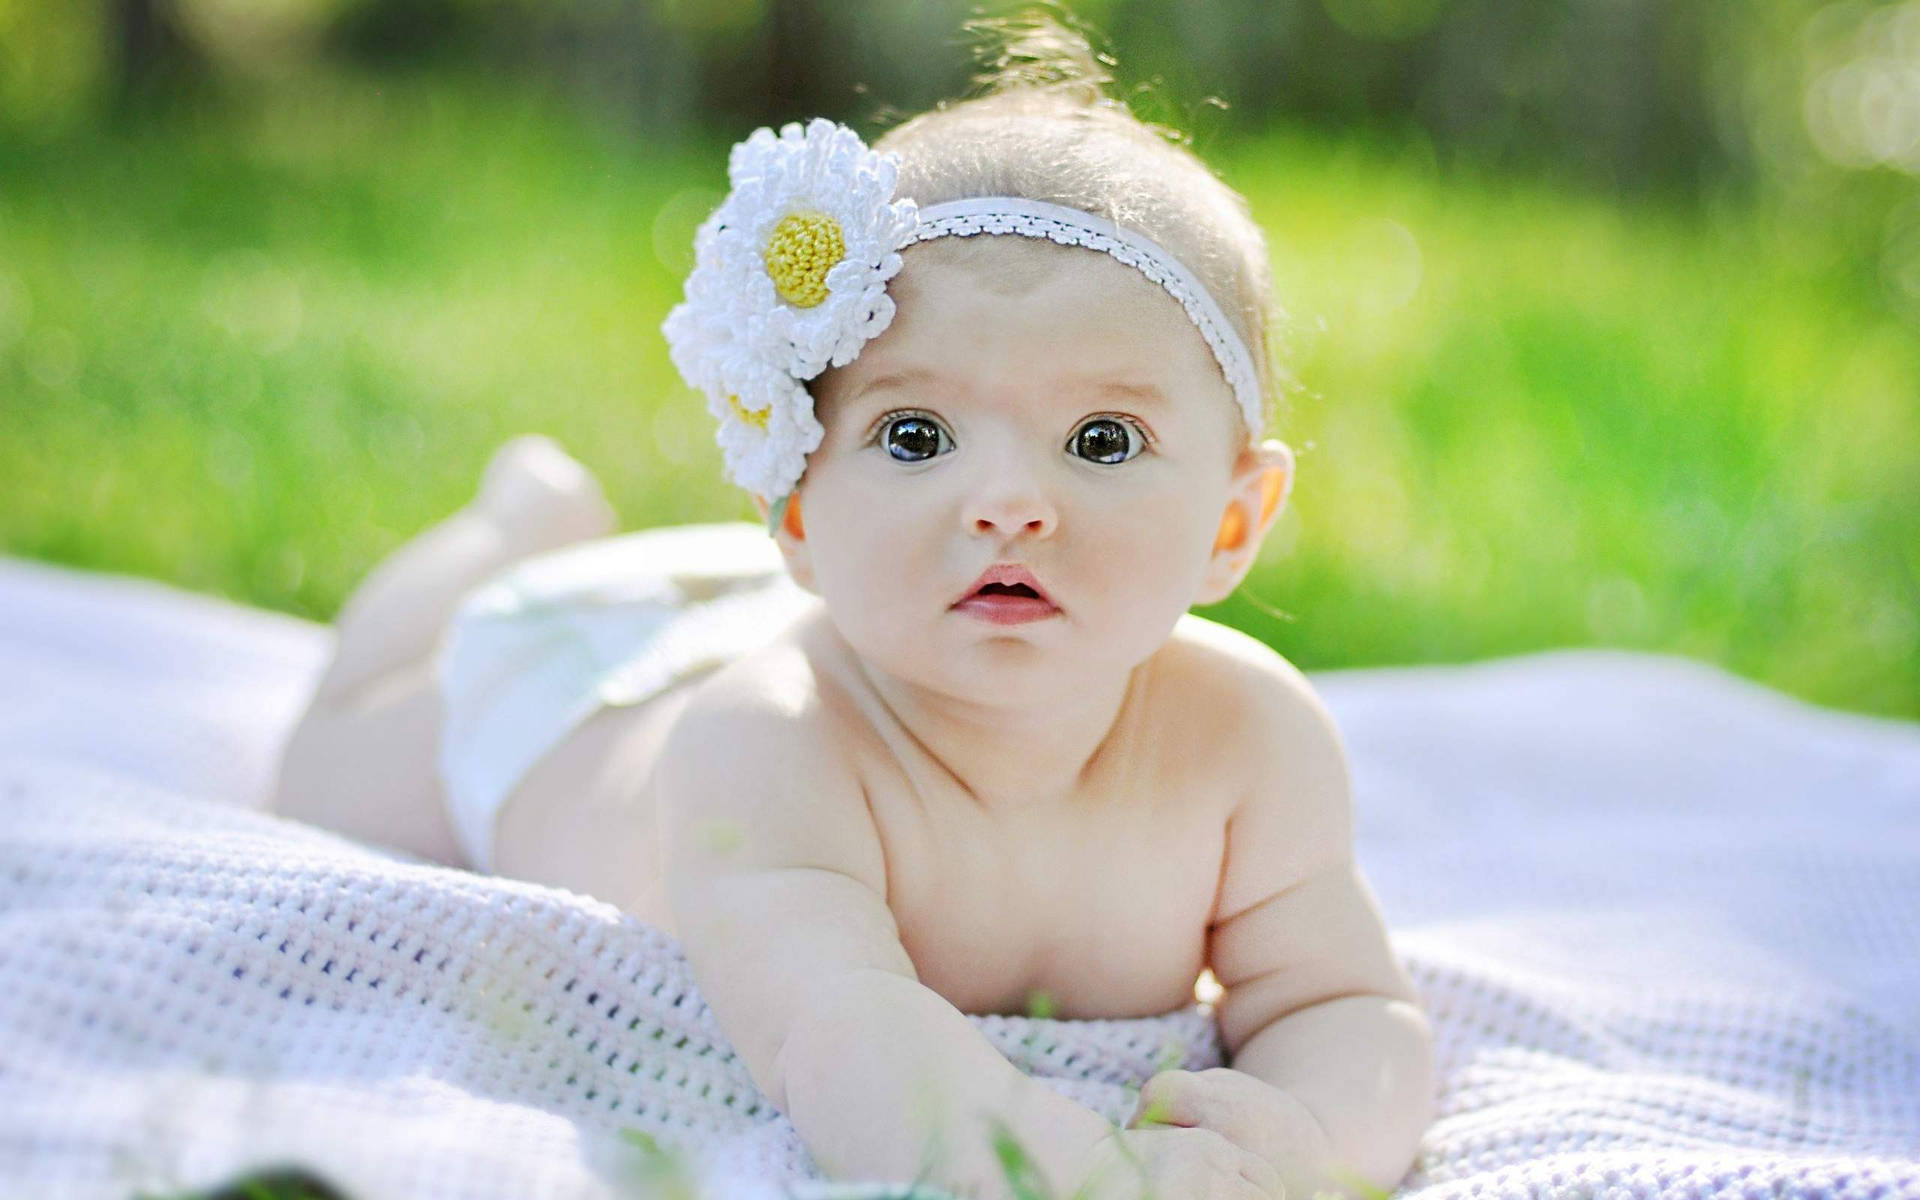 A beautiful baby taking in the sights on a summer day Wallpaper